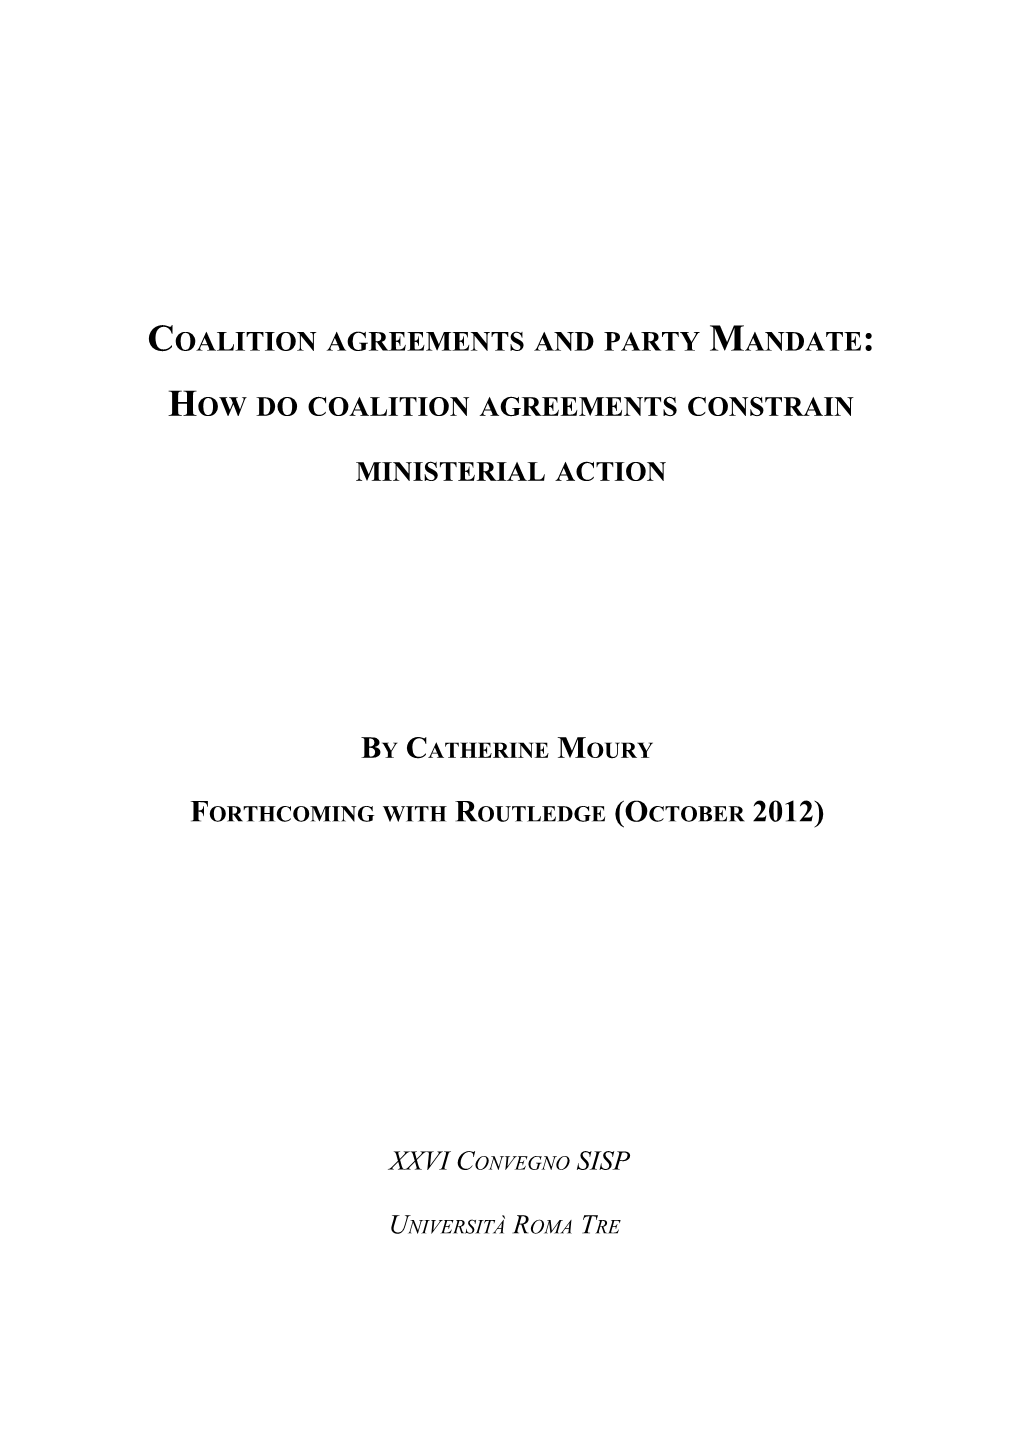 Coalition Agreements and Party Mandate: How Do Coalition Agreements Constrain Ministerial Action